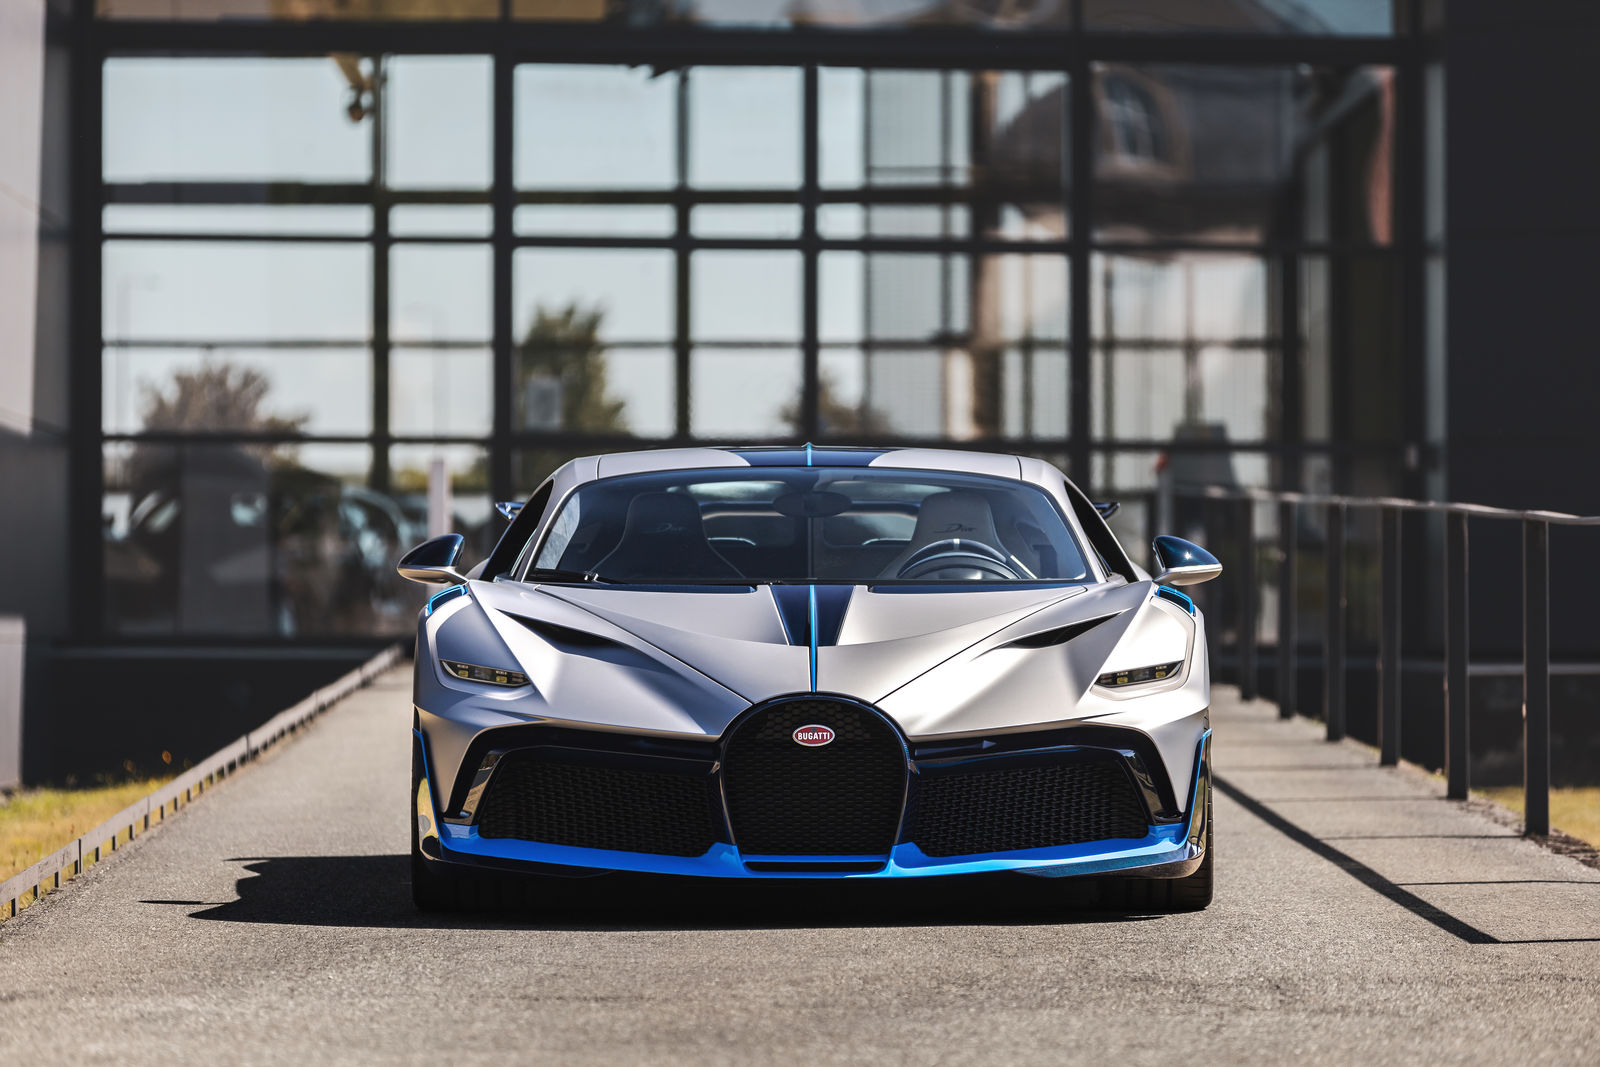 Bugatti Divo Hypercar Lands Stateside Heres The First Unit For The Us Market Autoevolution 5264